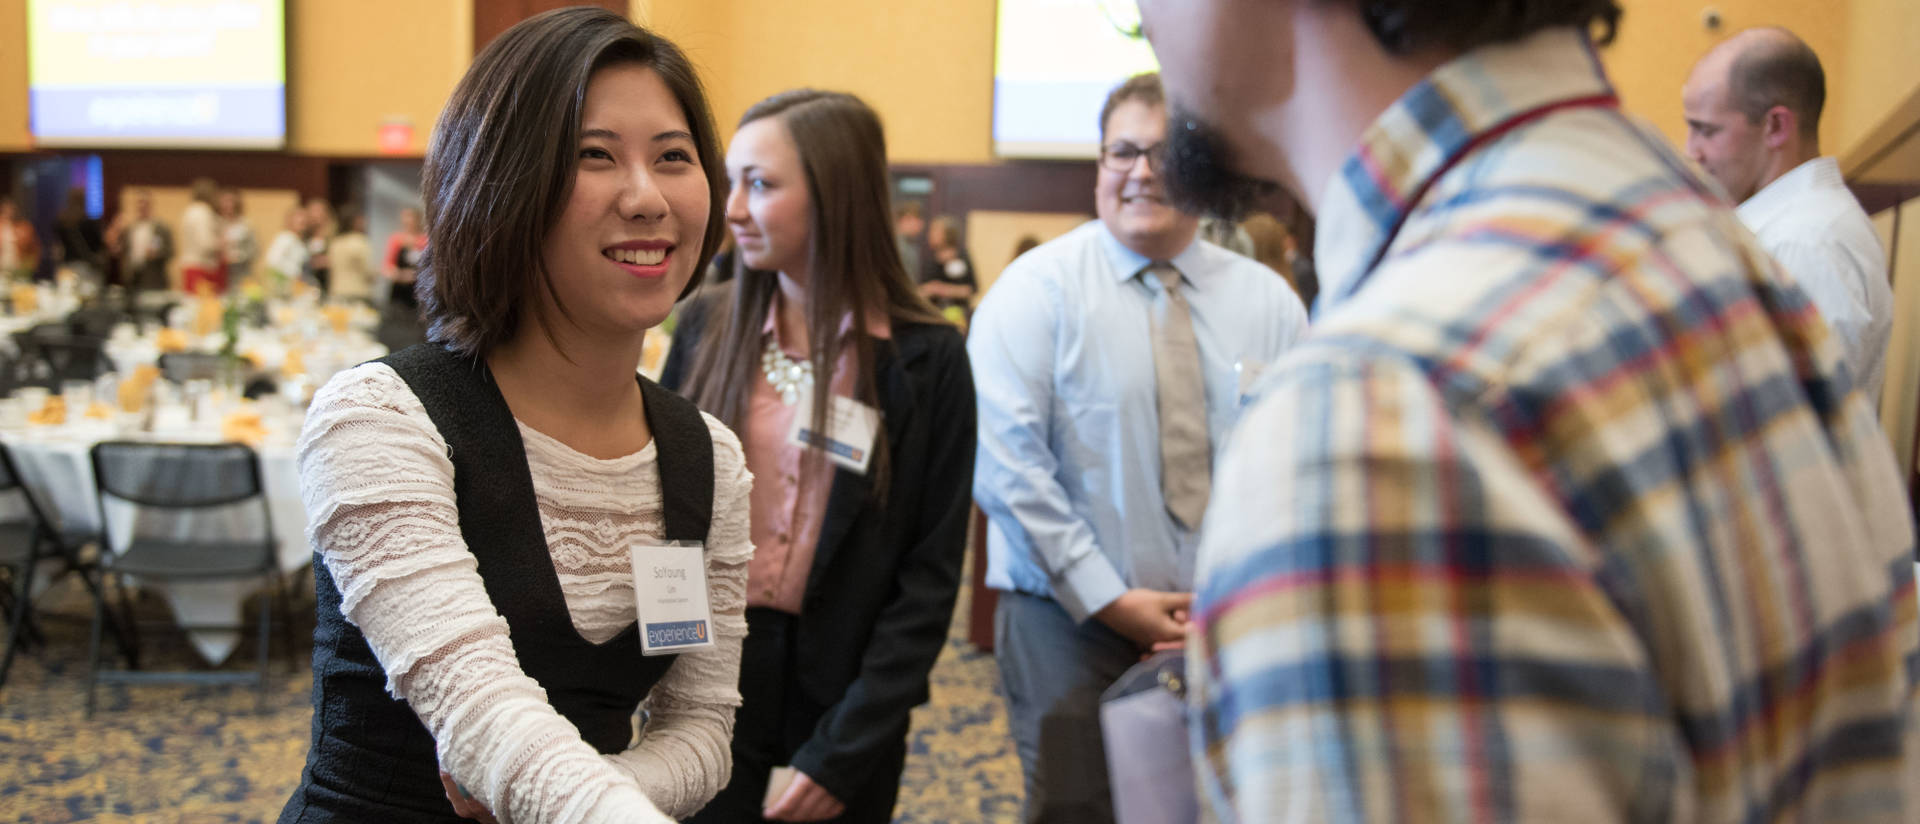 Student shaking hands with alumni during speed networking event at UW-Eau Claire’s Experience U.